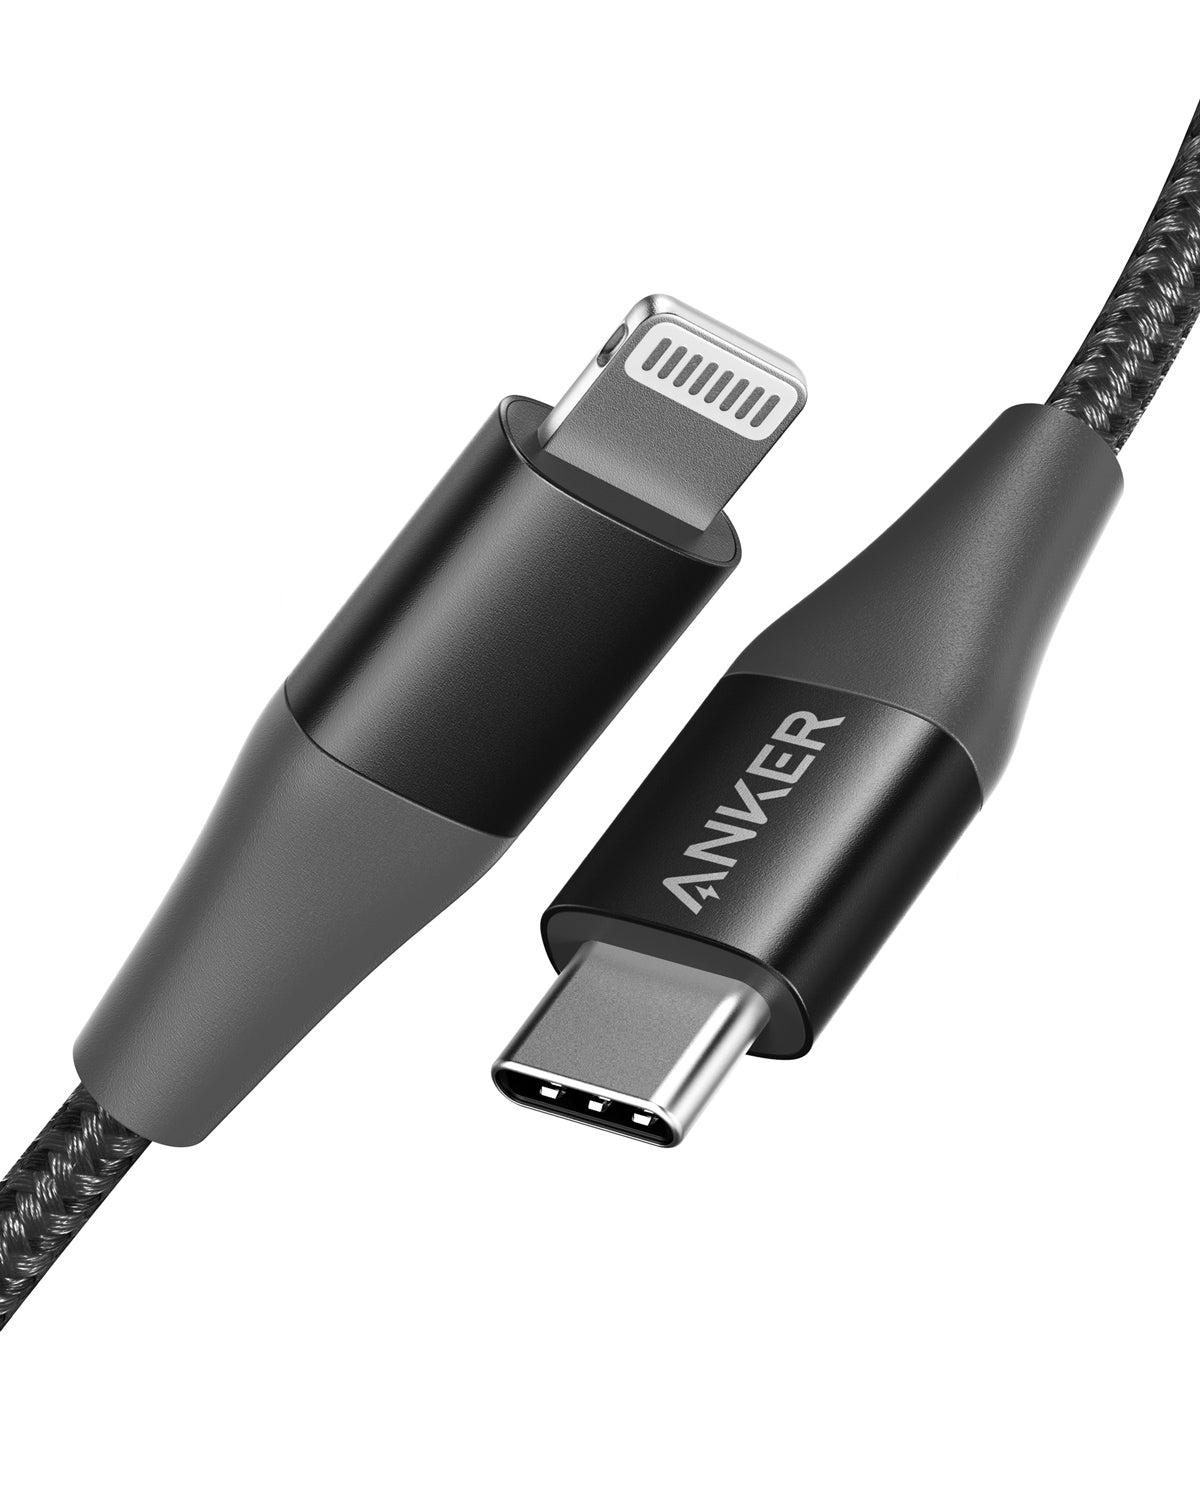 iPhone 15's Braided USB-C Cable Could Be 50% Longer - MacRumors